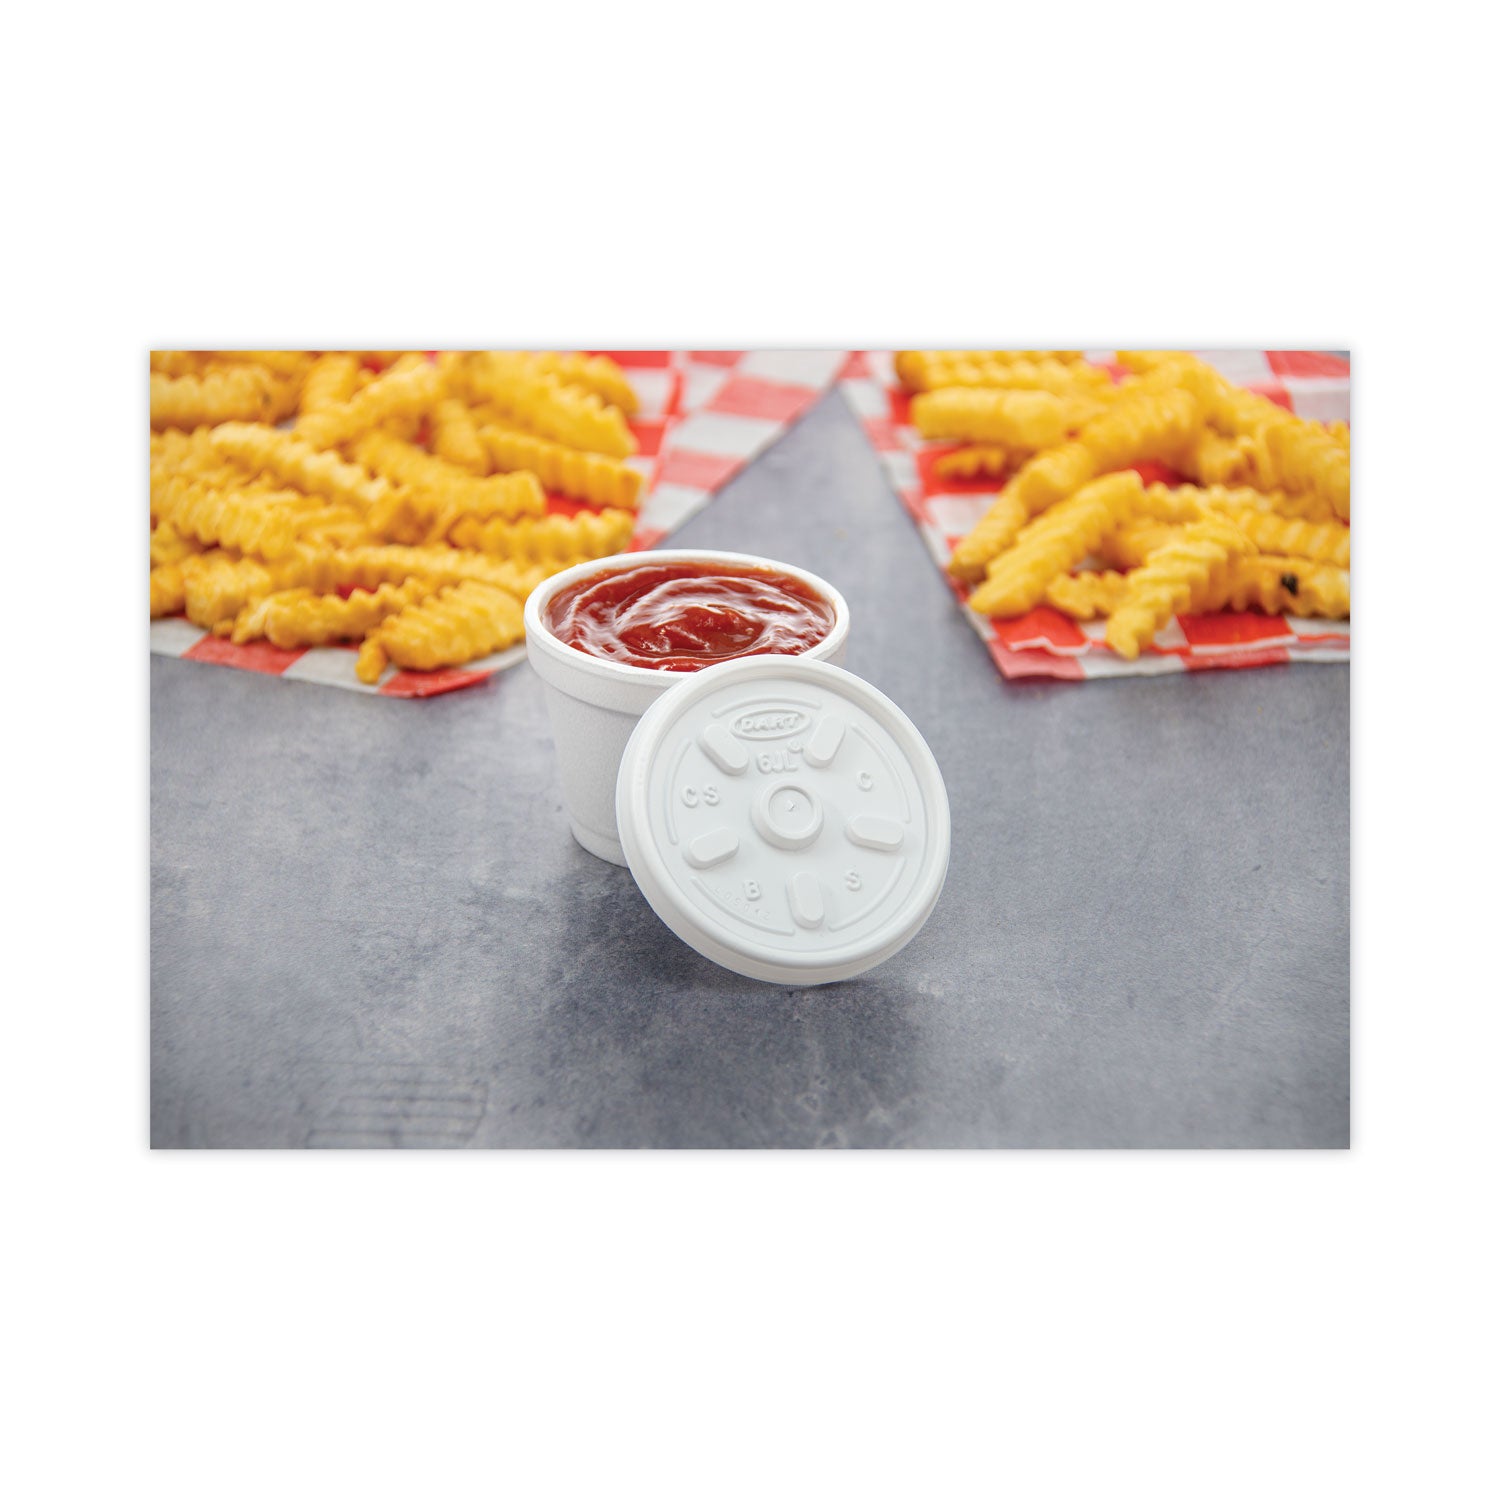 Plastic Lids for Foam Containers, Vented, Fits 3.5-6 oz, White, 100/Pack, 10 Packs/Carton - 